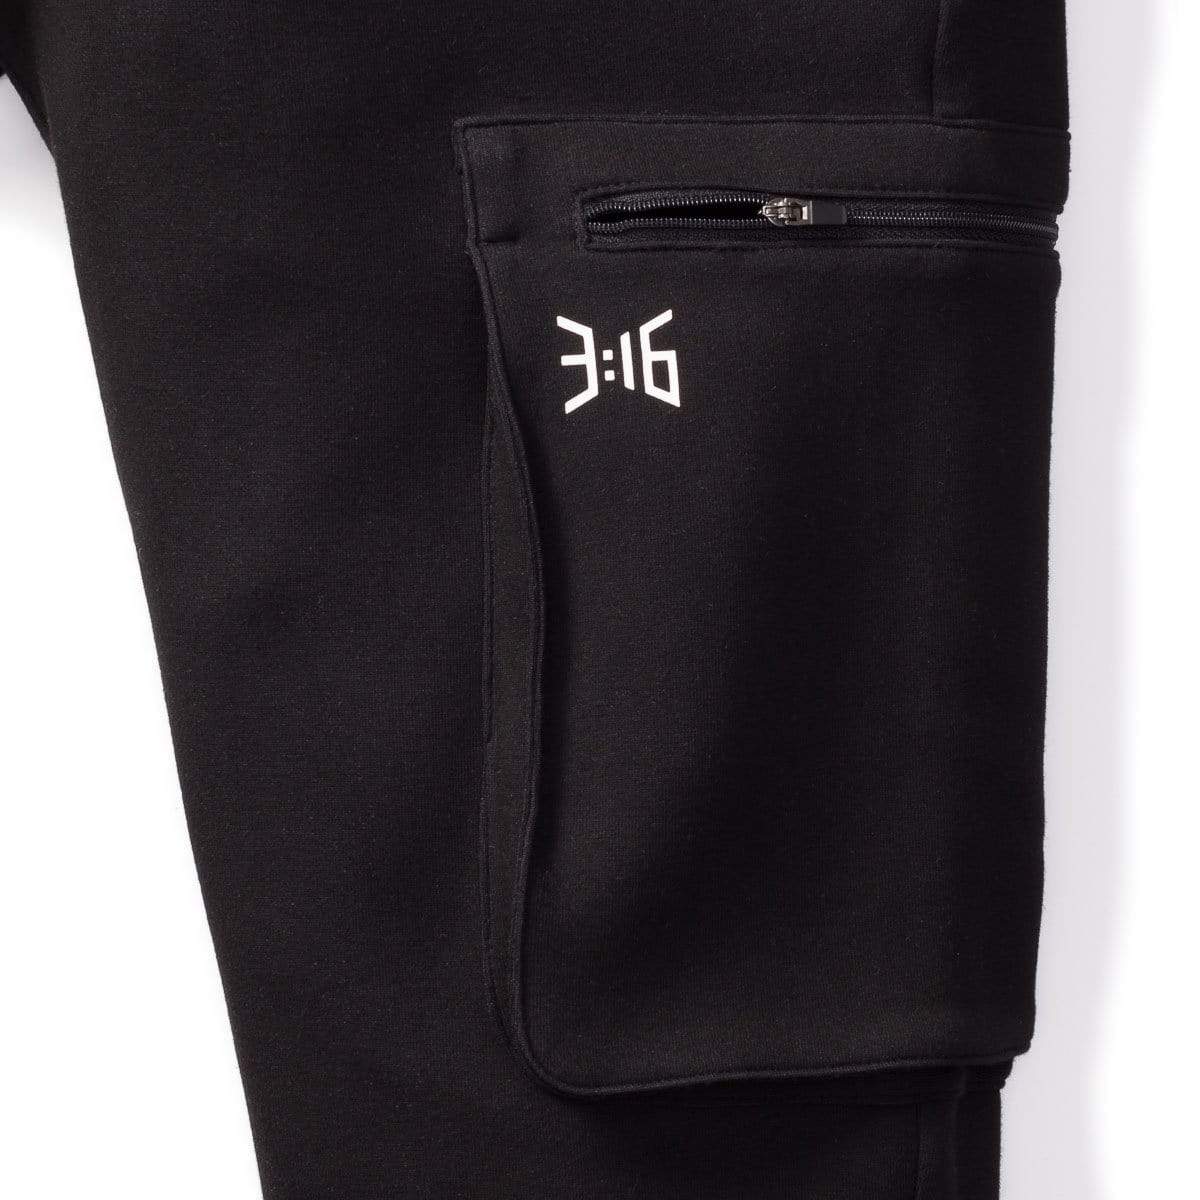 3:16 Collection Joggers SM 3:16 Cargo Joggers - Black